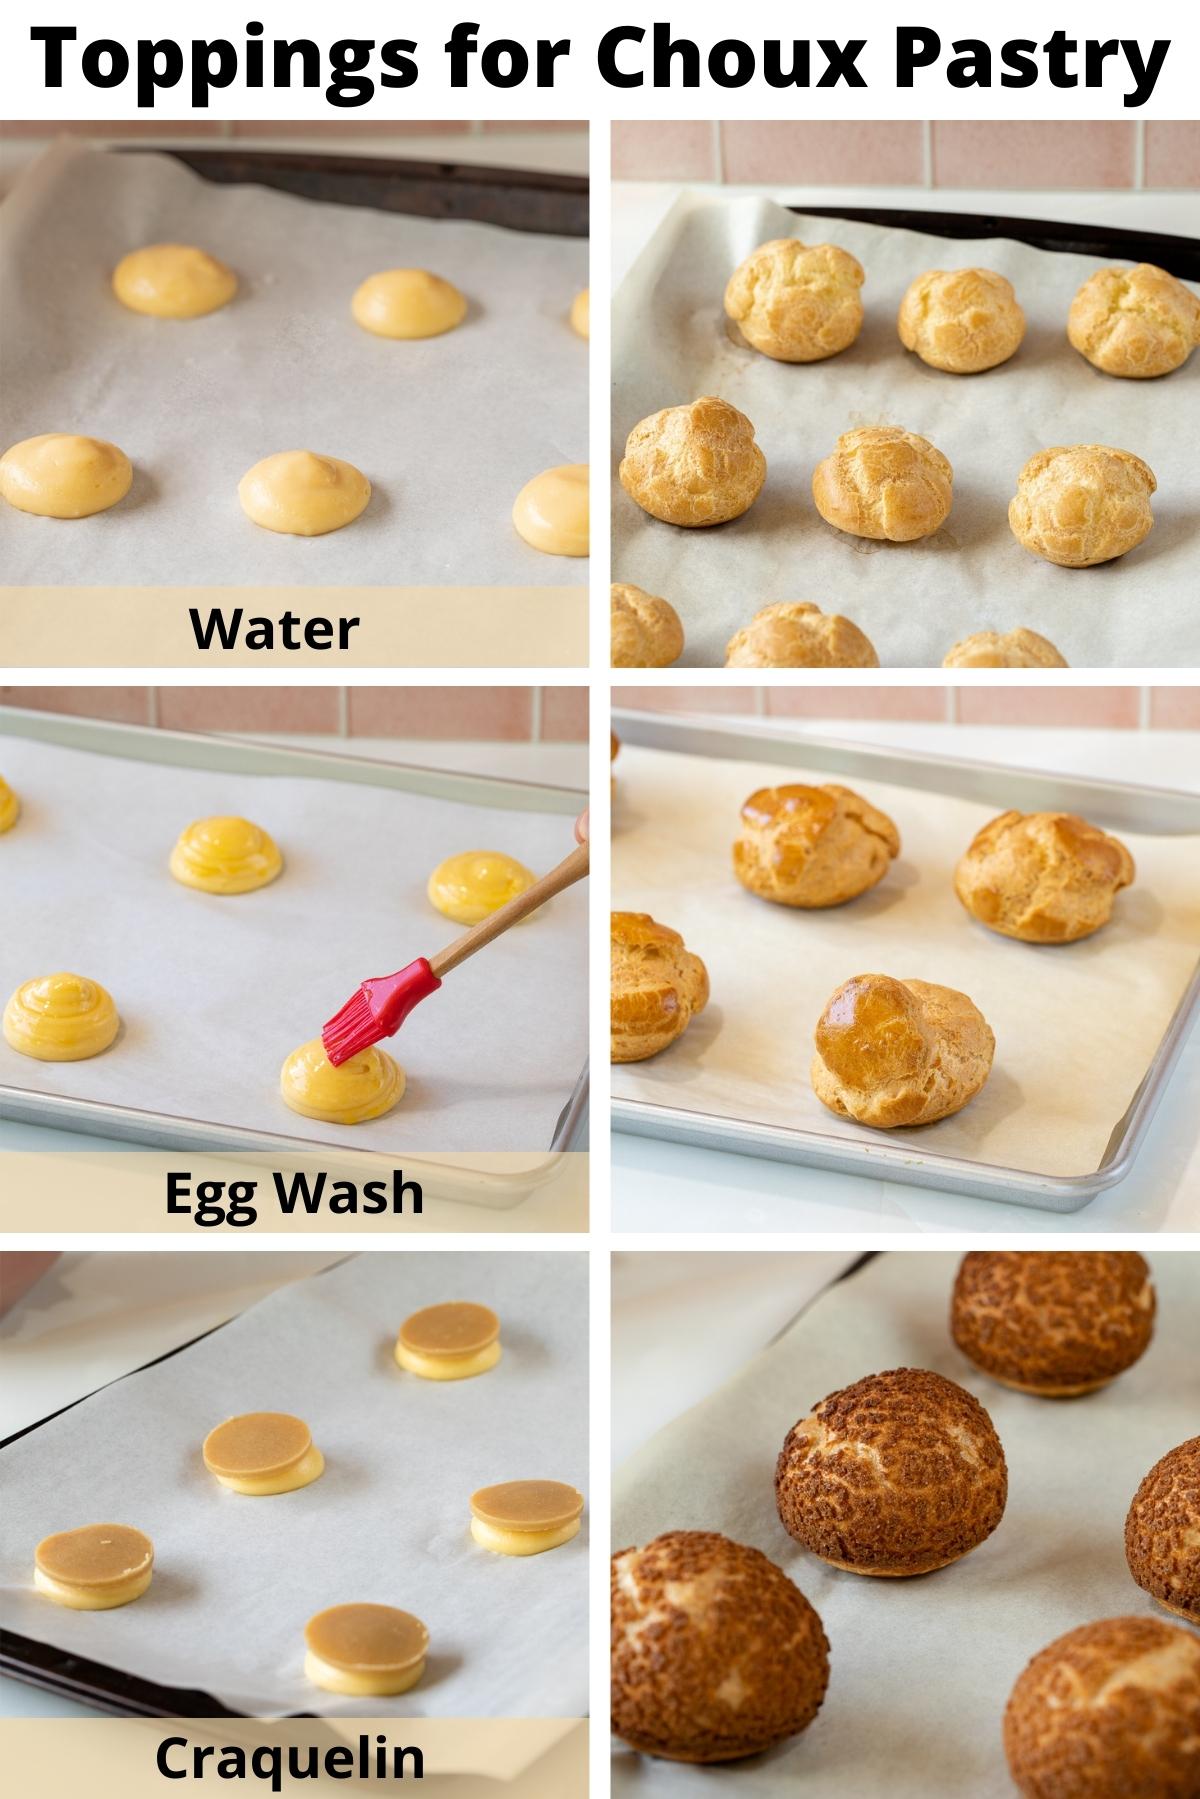 water, egg wash, and craquelin topping for cream puffs.